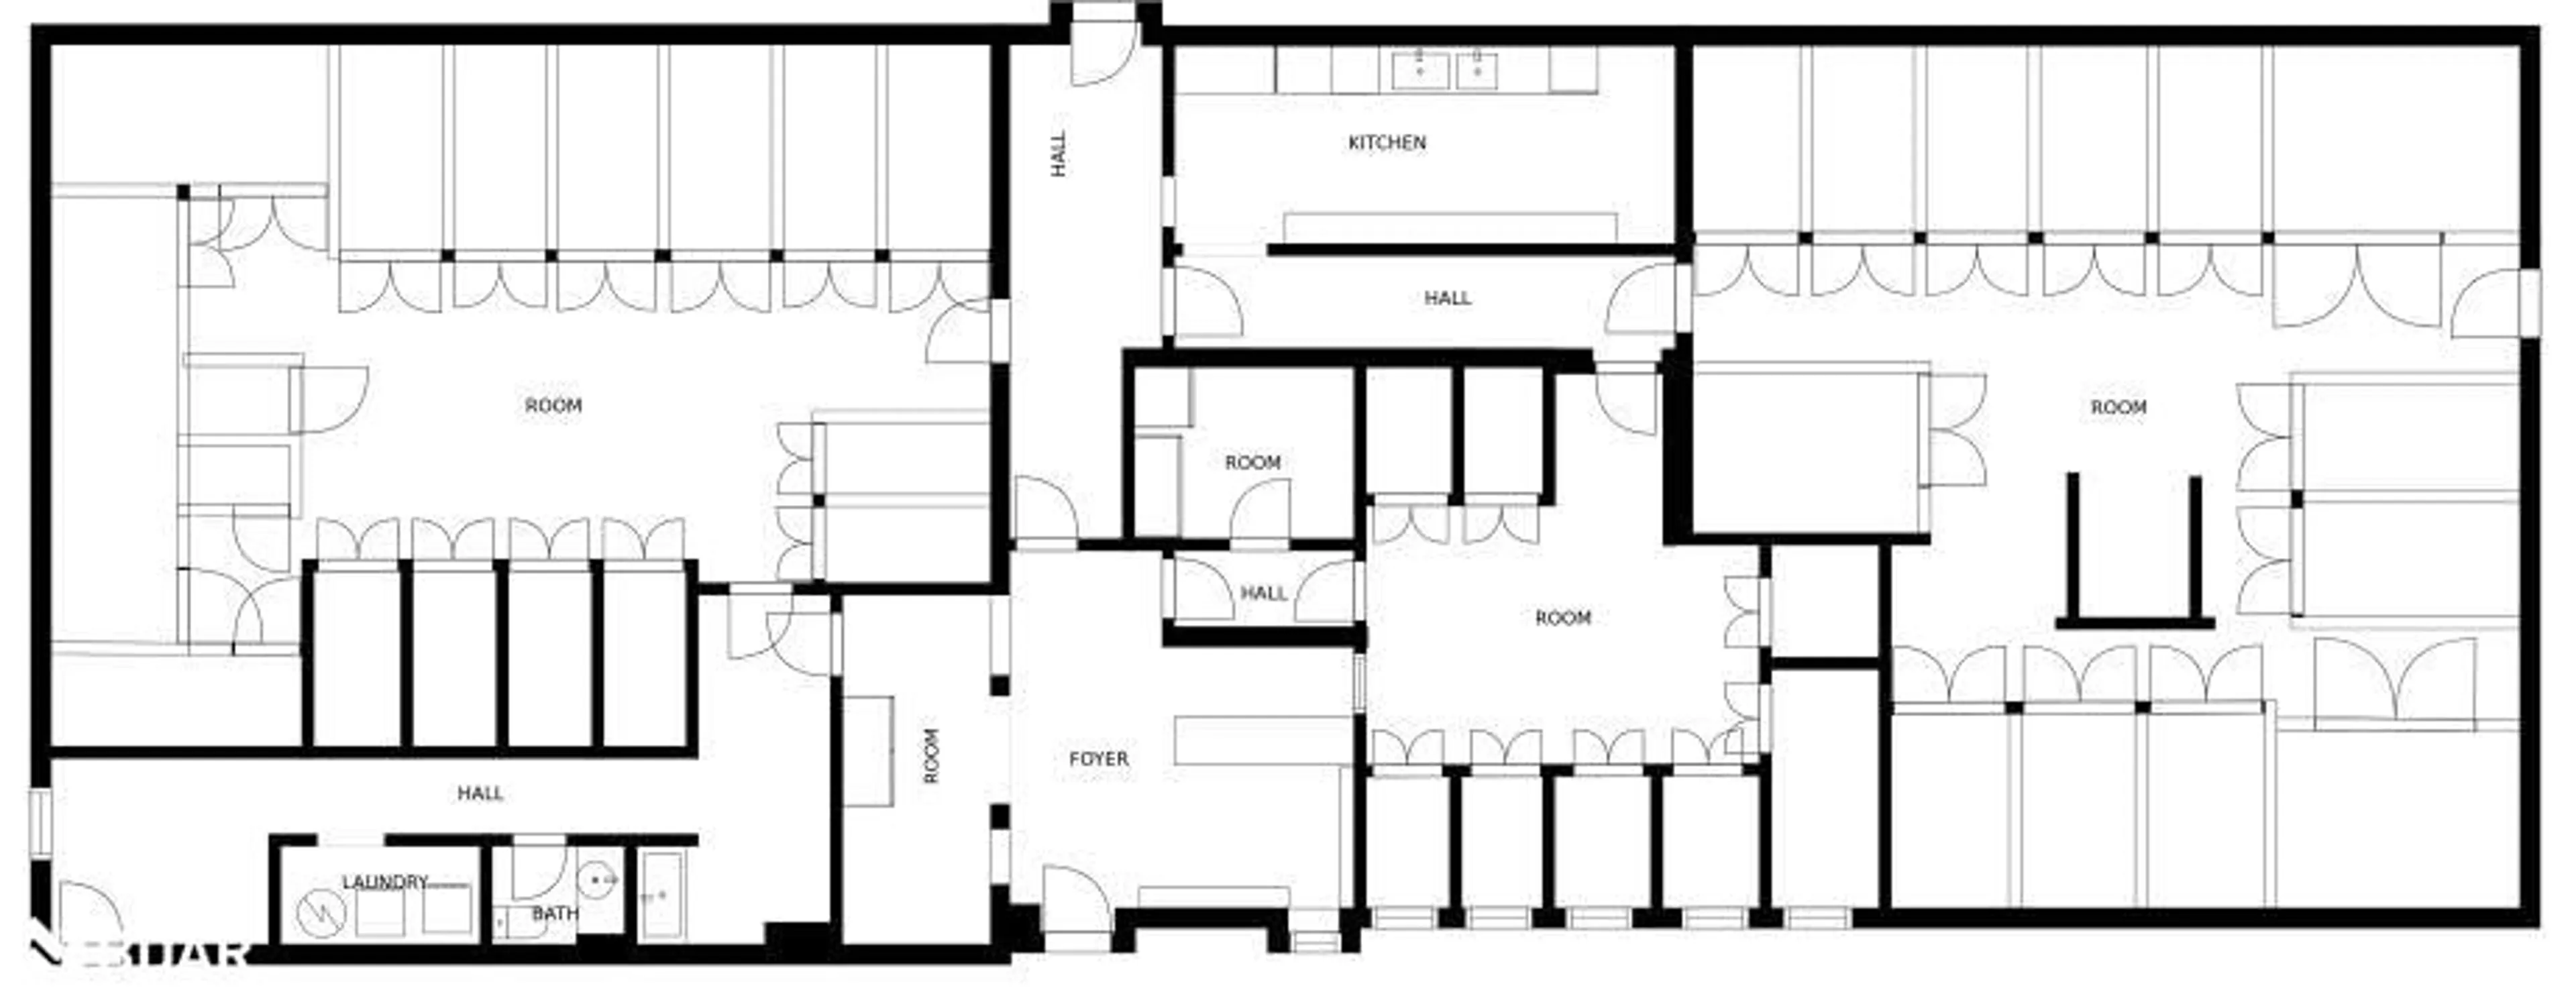 Floor plan for 301 Concession 4 East Rd, Tiny Ontario L0L 2T0